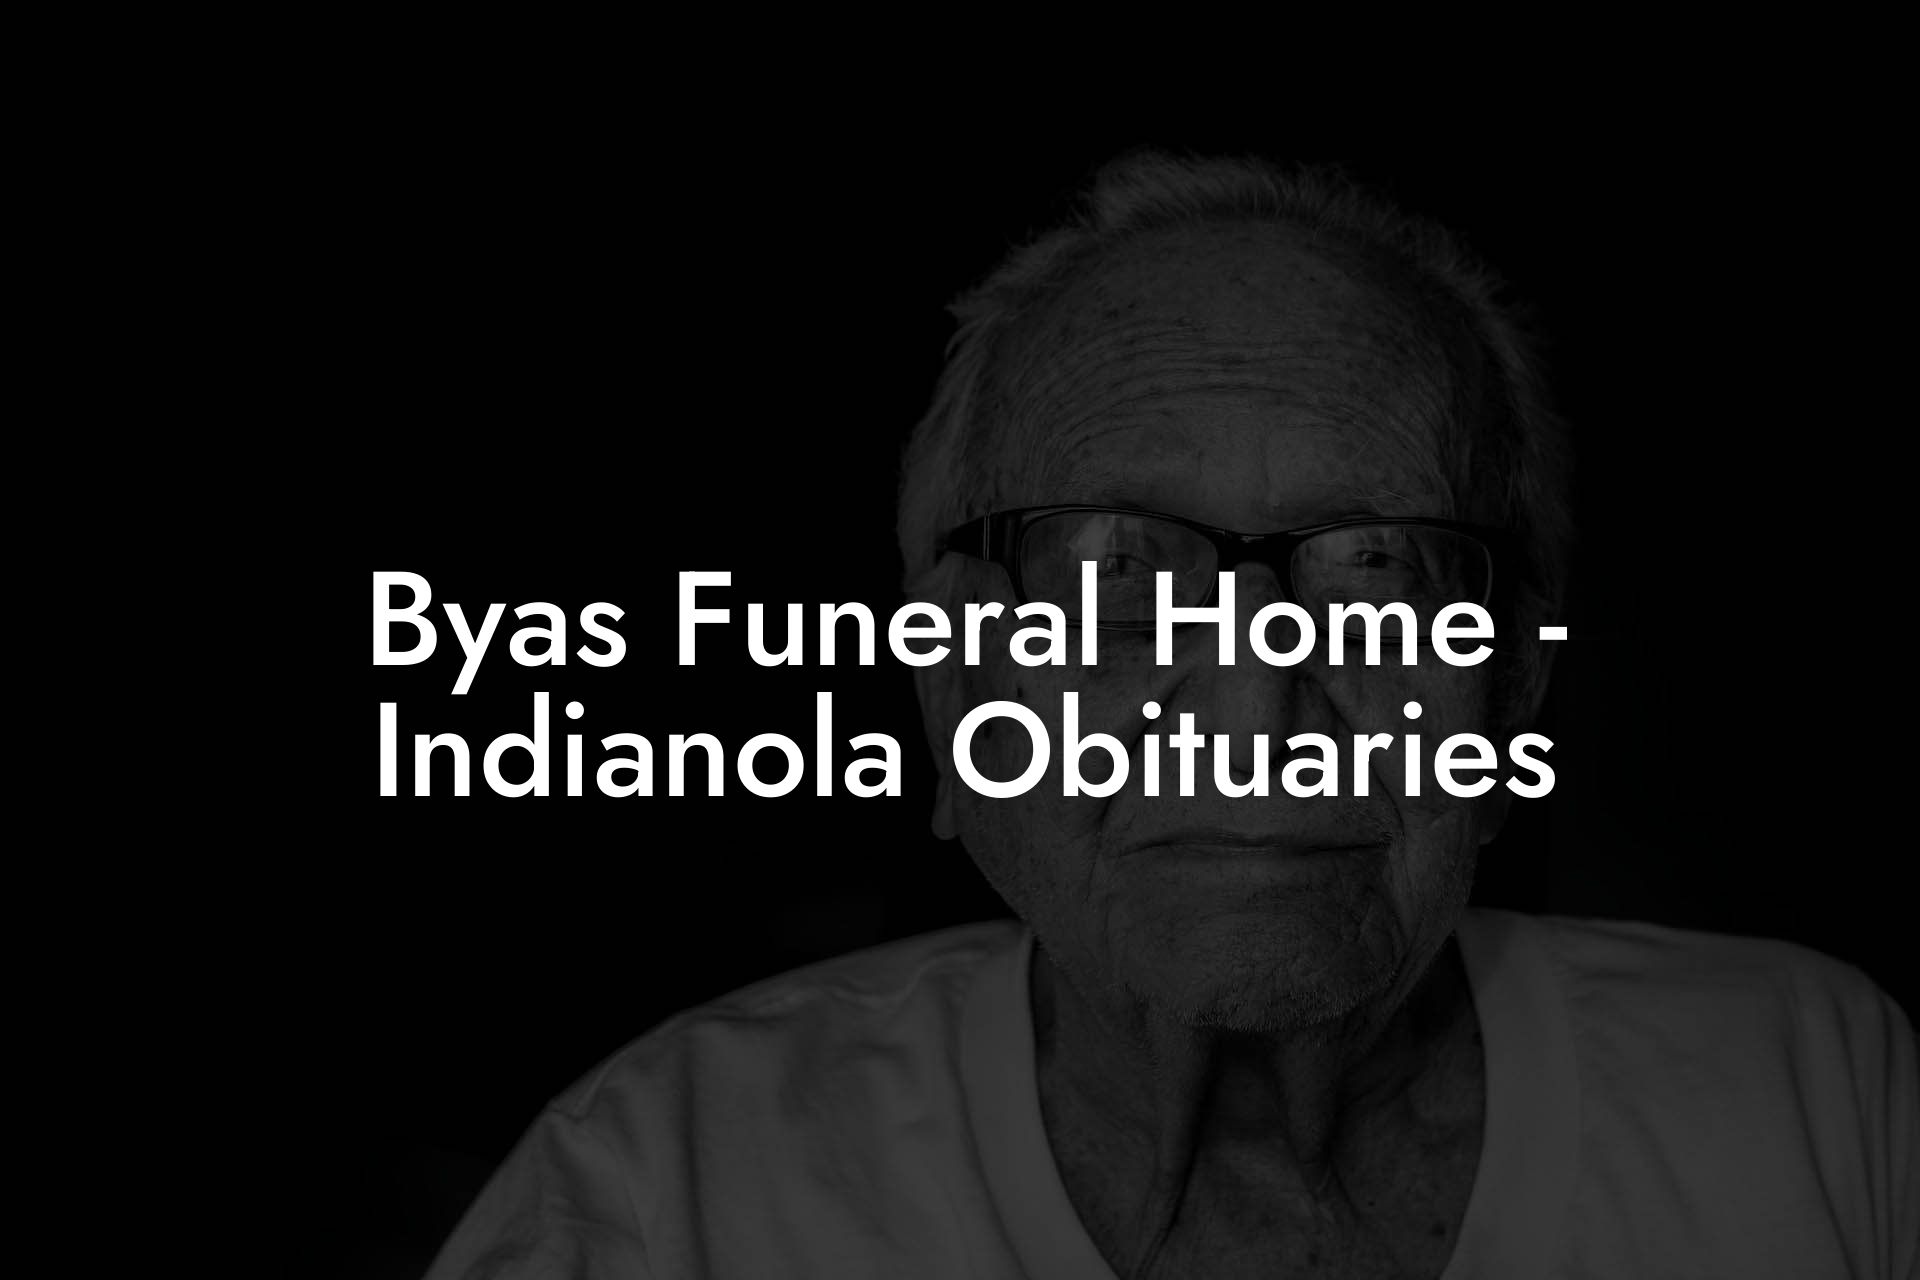 Byas Funeral Home - Indianola Obituaries